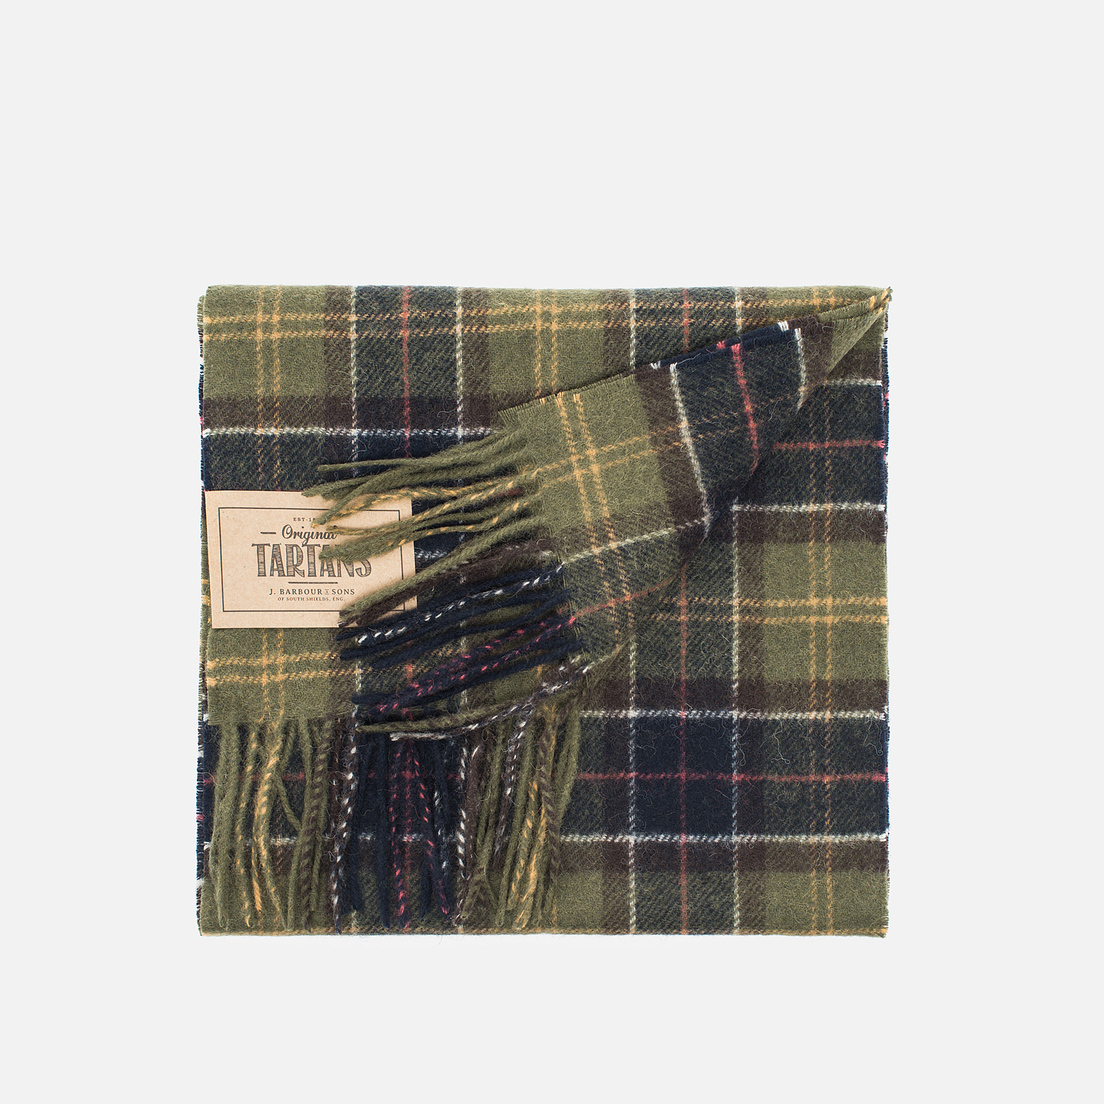 Barbour Шарф Lambswool